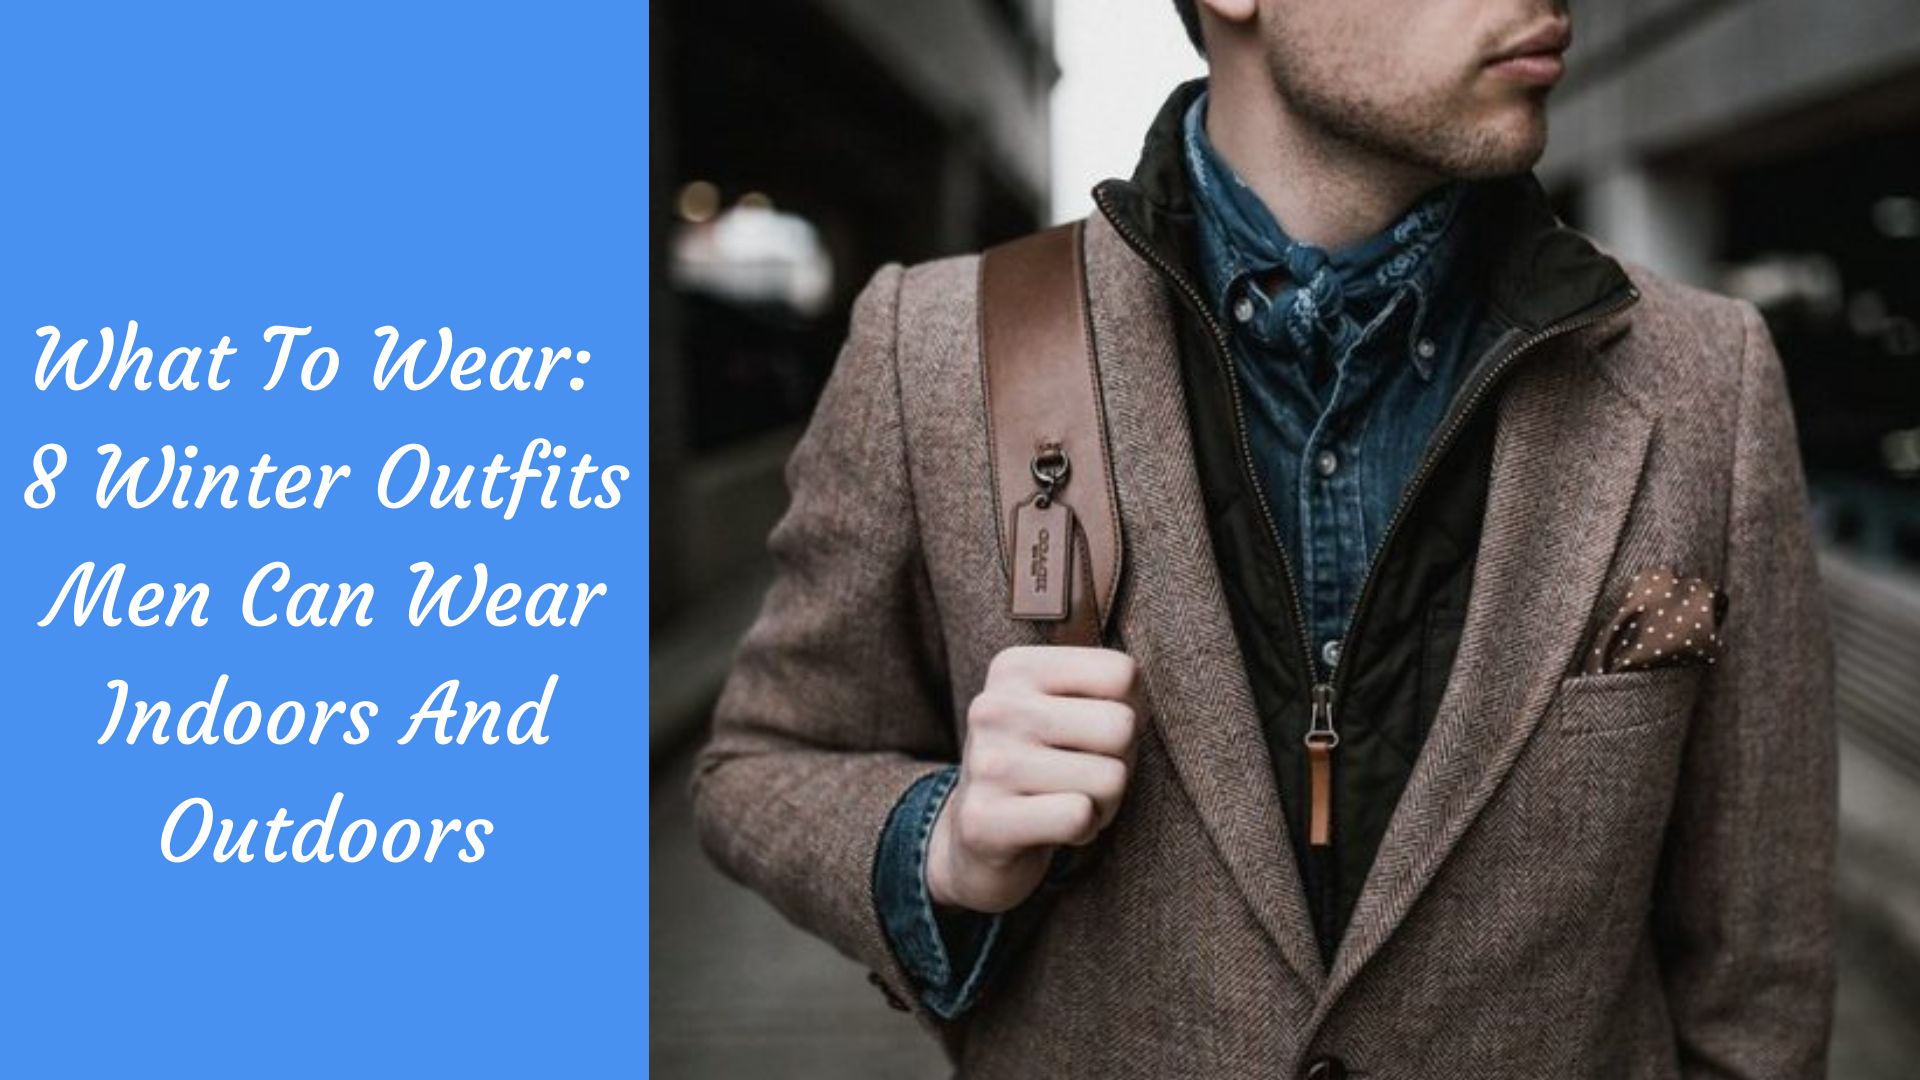 What To Wear: 8 Winter Outfits Men Can Wear Indoors And Outdoors